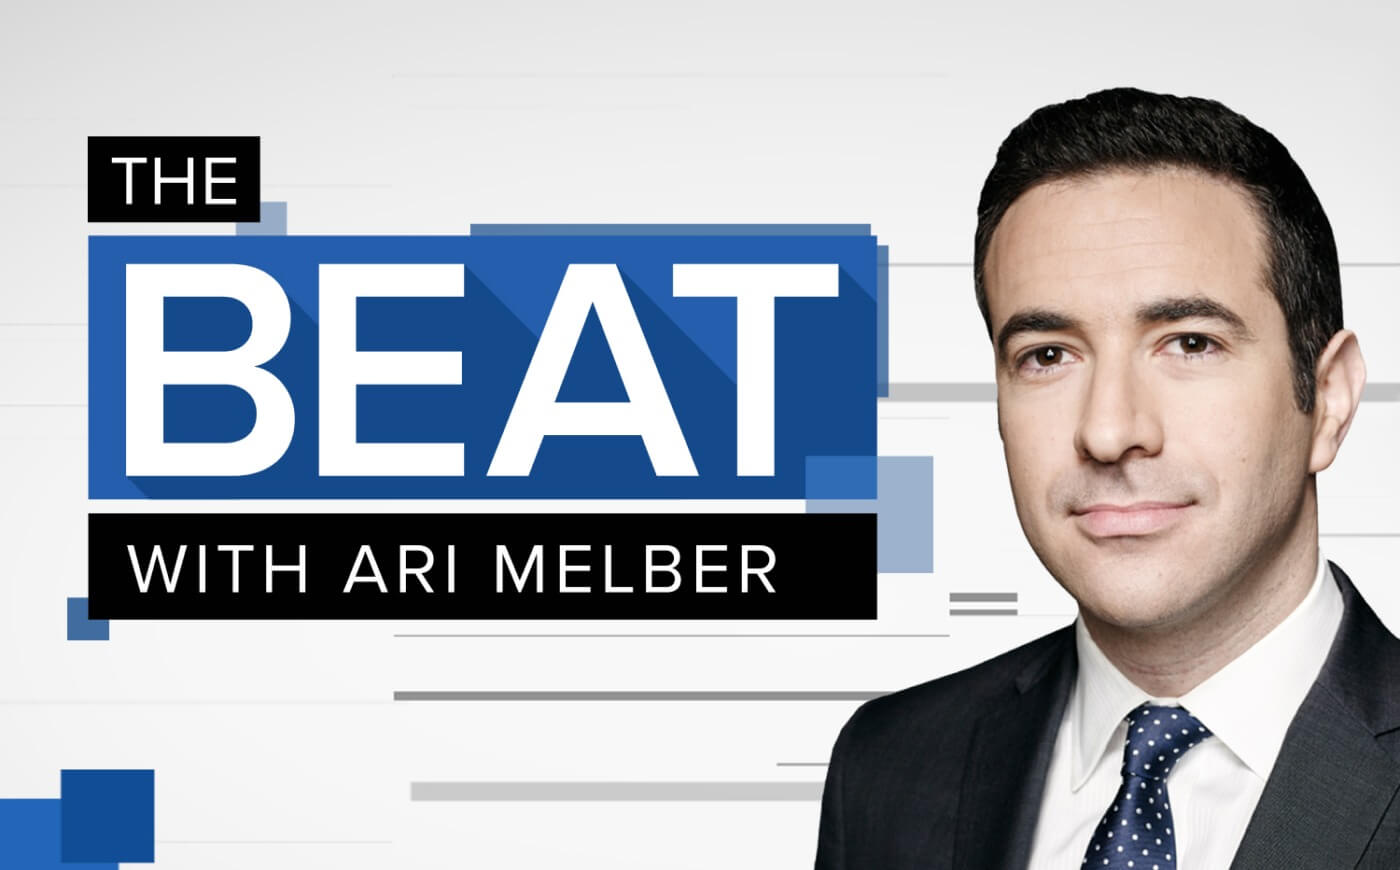 MSNBC Wine GlassesThe Beat with Ari Melber Laser Engraved Wine Glass